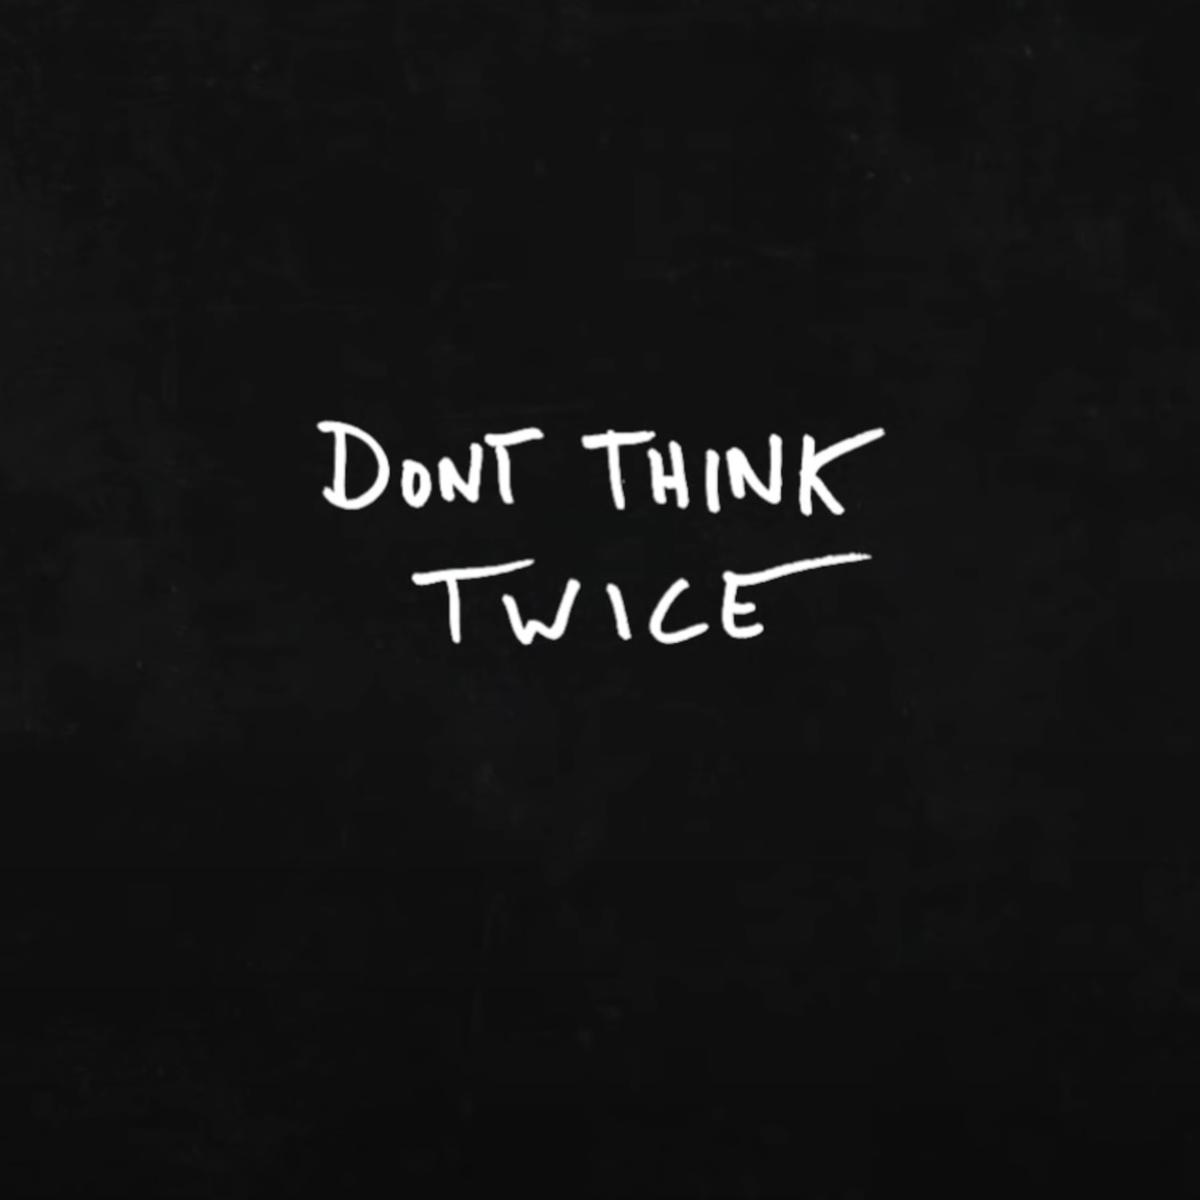 G-Eazy - Don't Think Twice (Bob Dylan Cover)